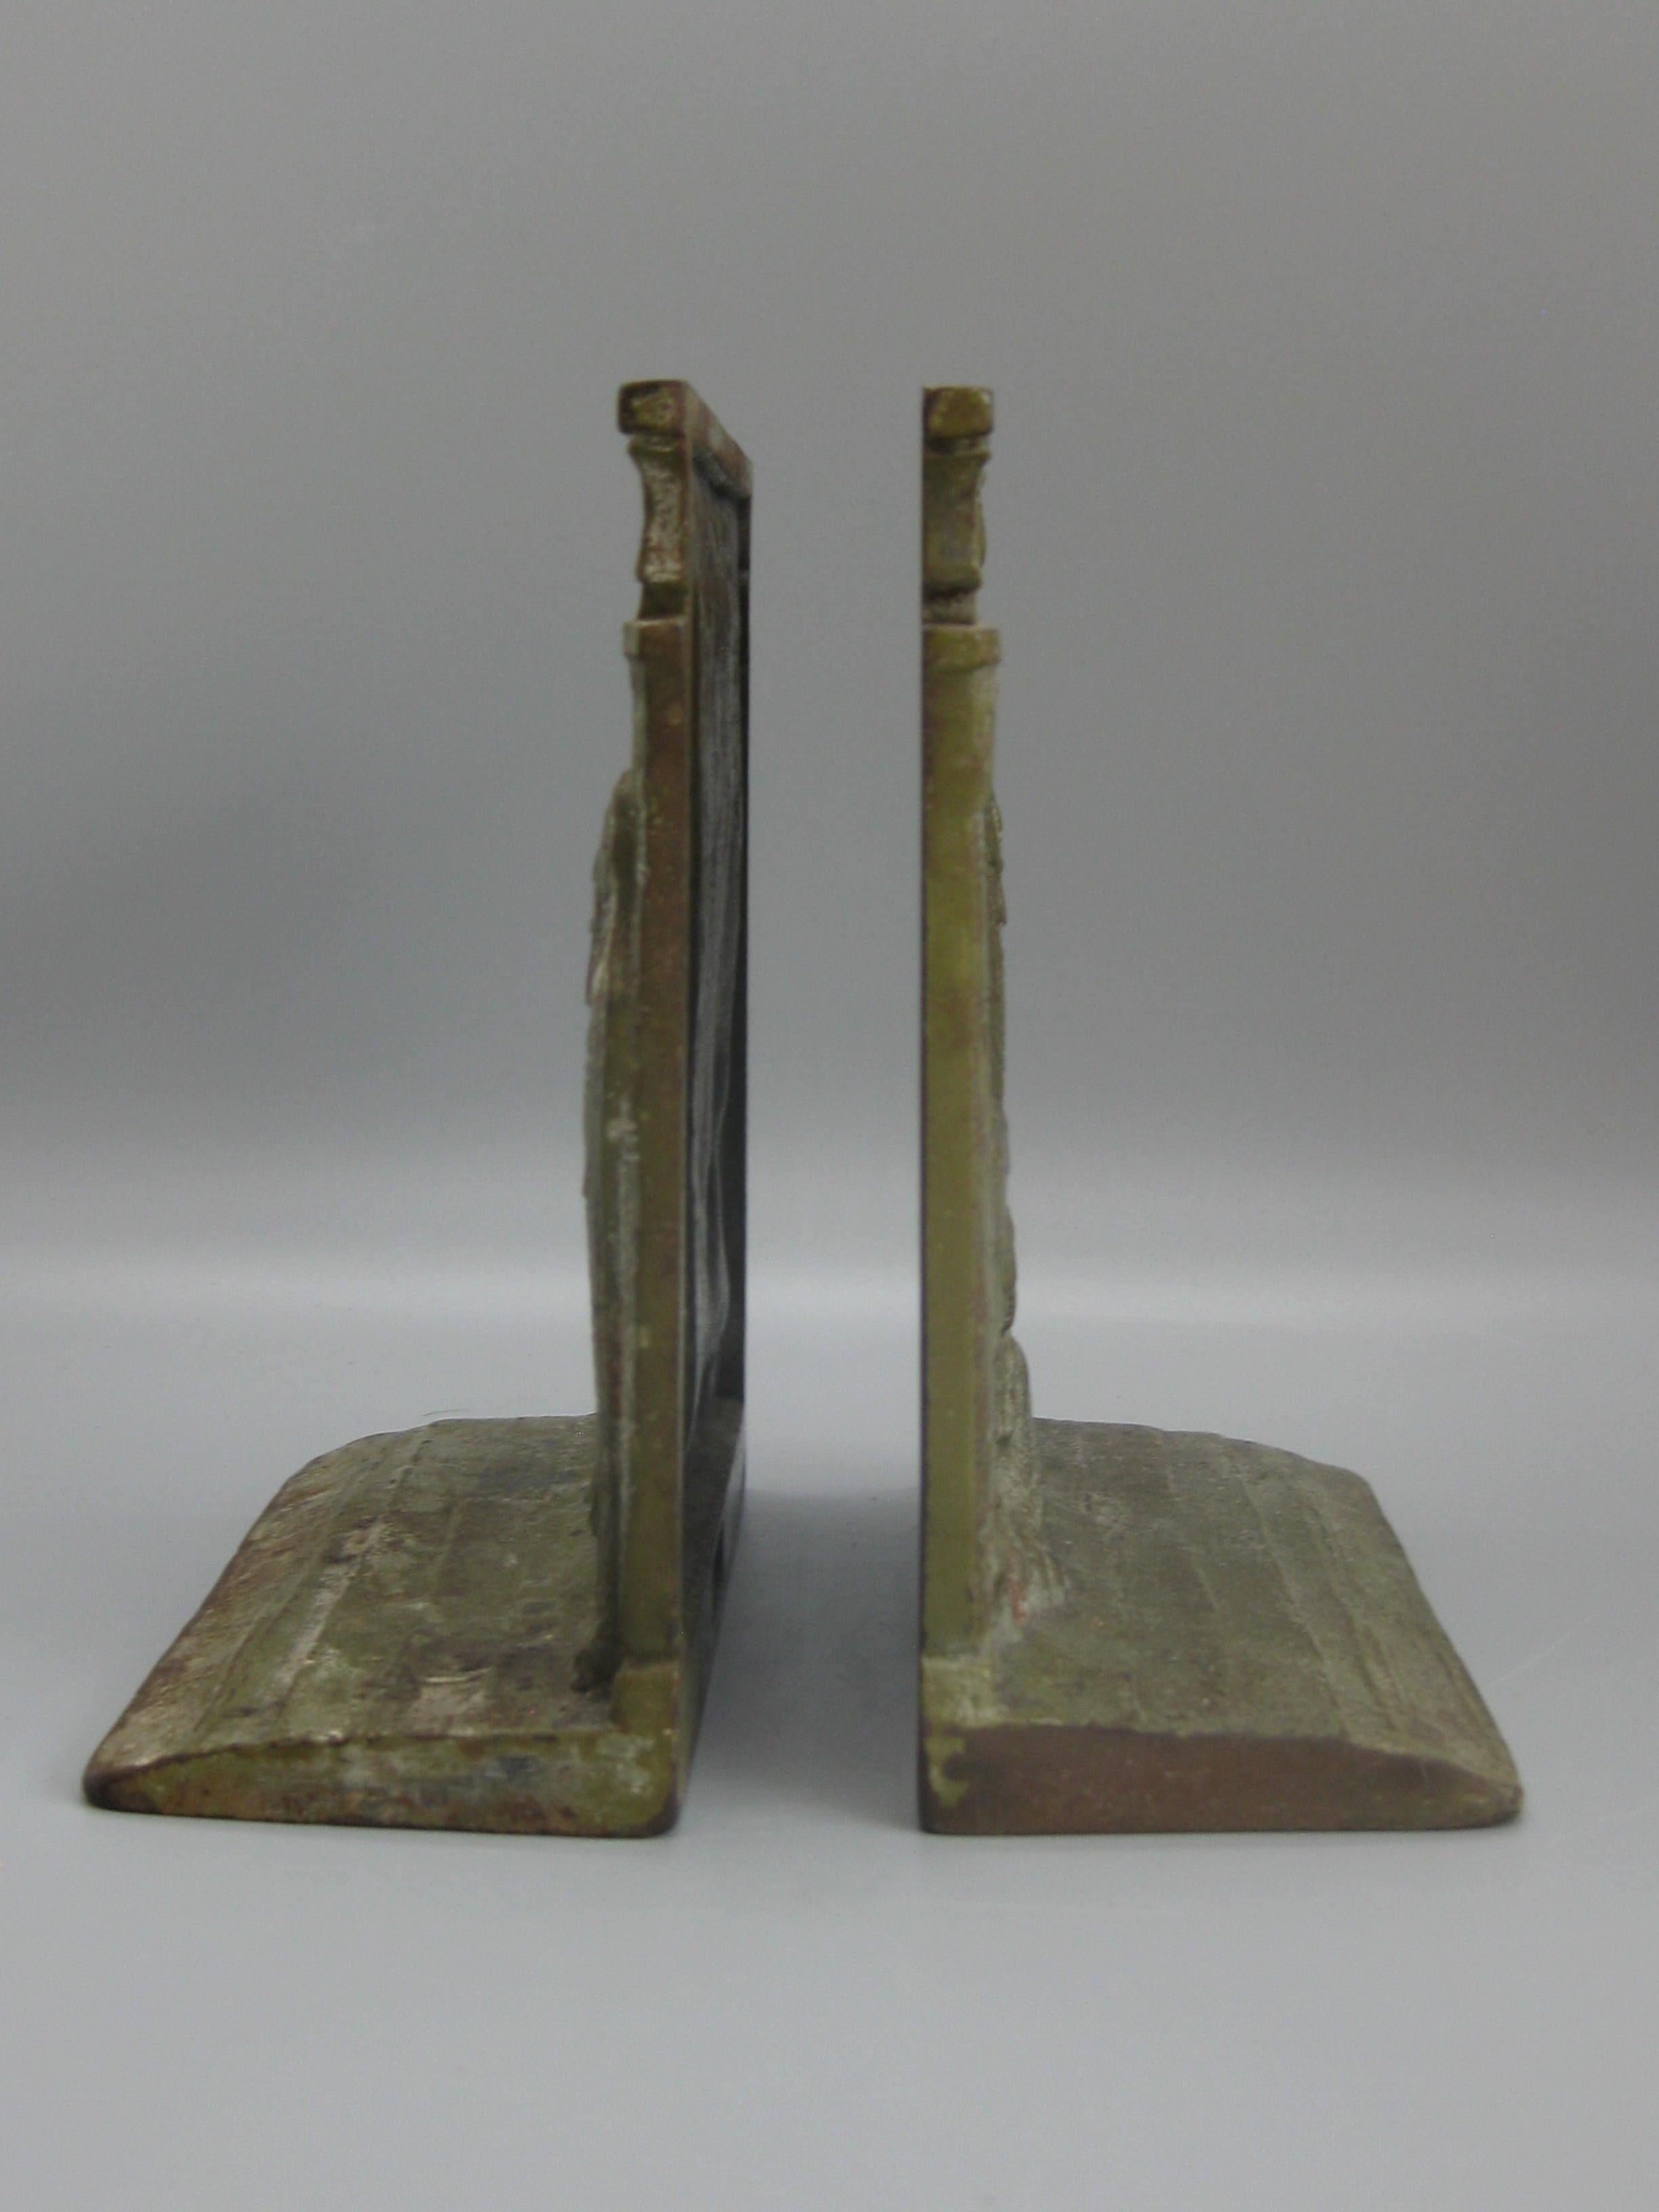 Antique Art Deco Egyptian Revival Judd #9900 Embossed Sphinx Cast Iron Bookends For Sale 8